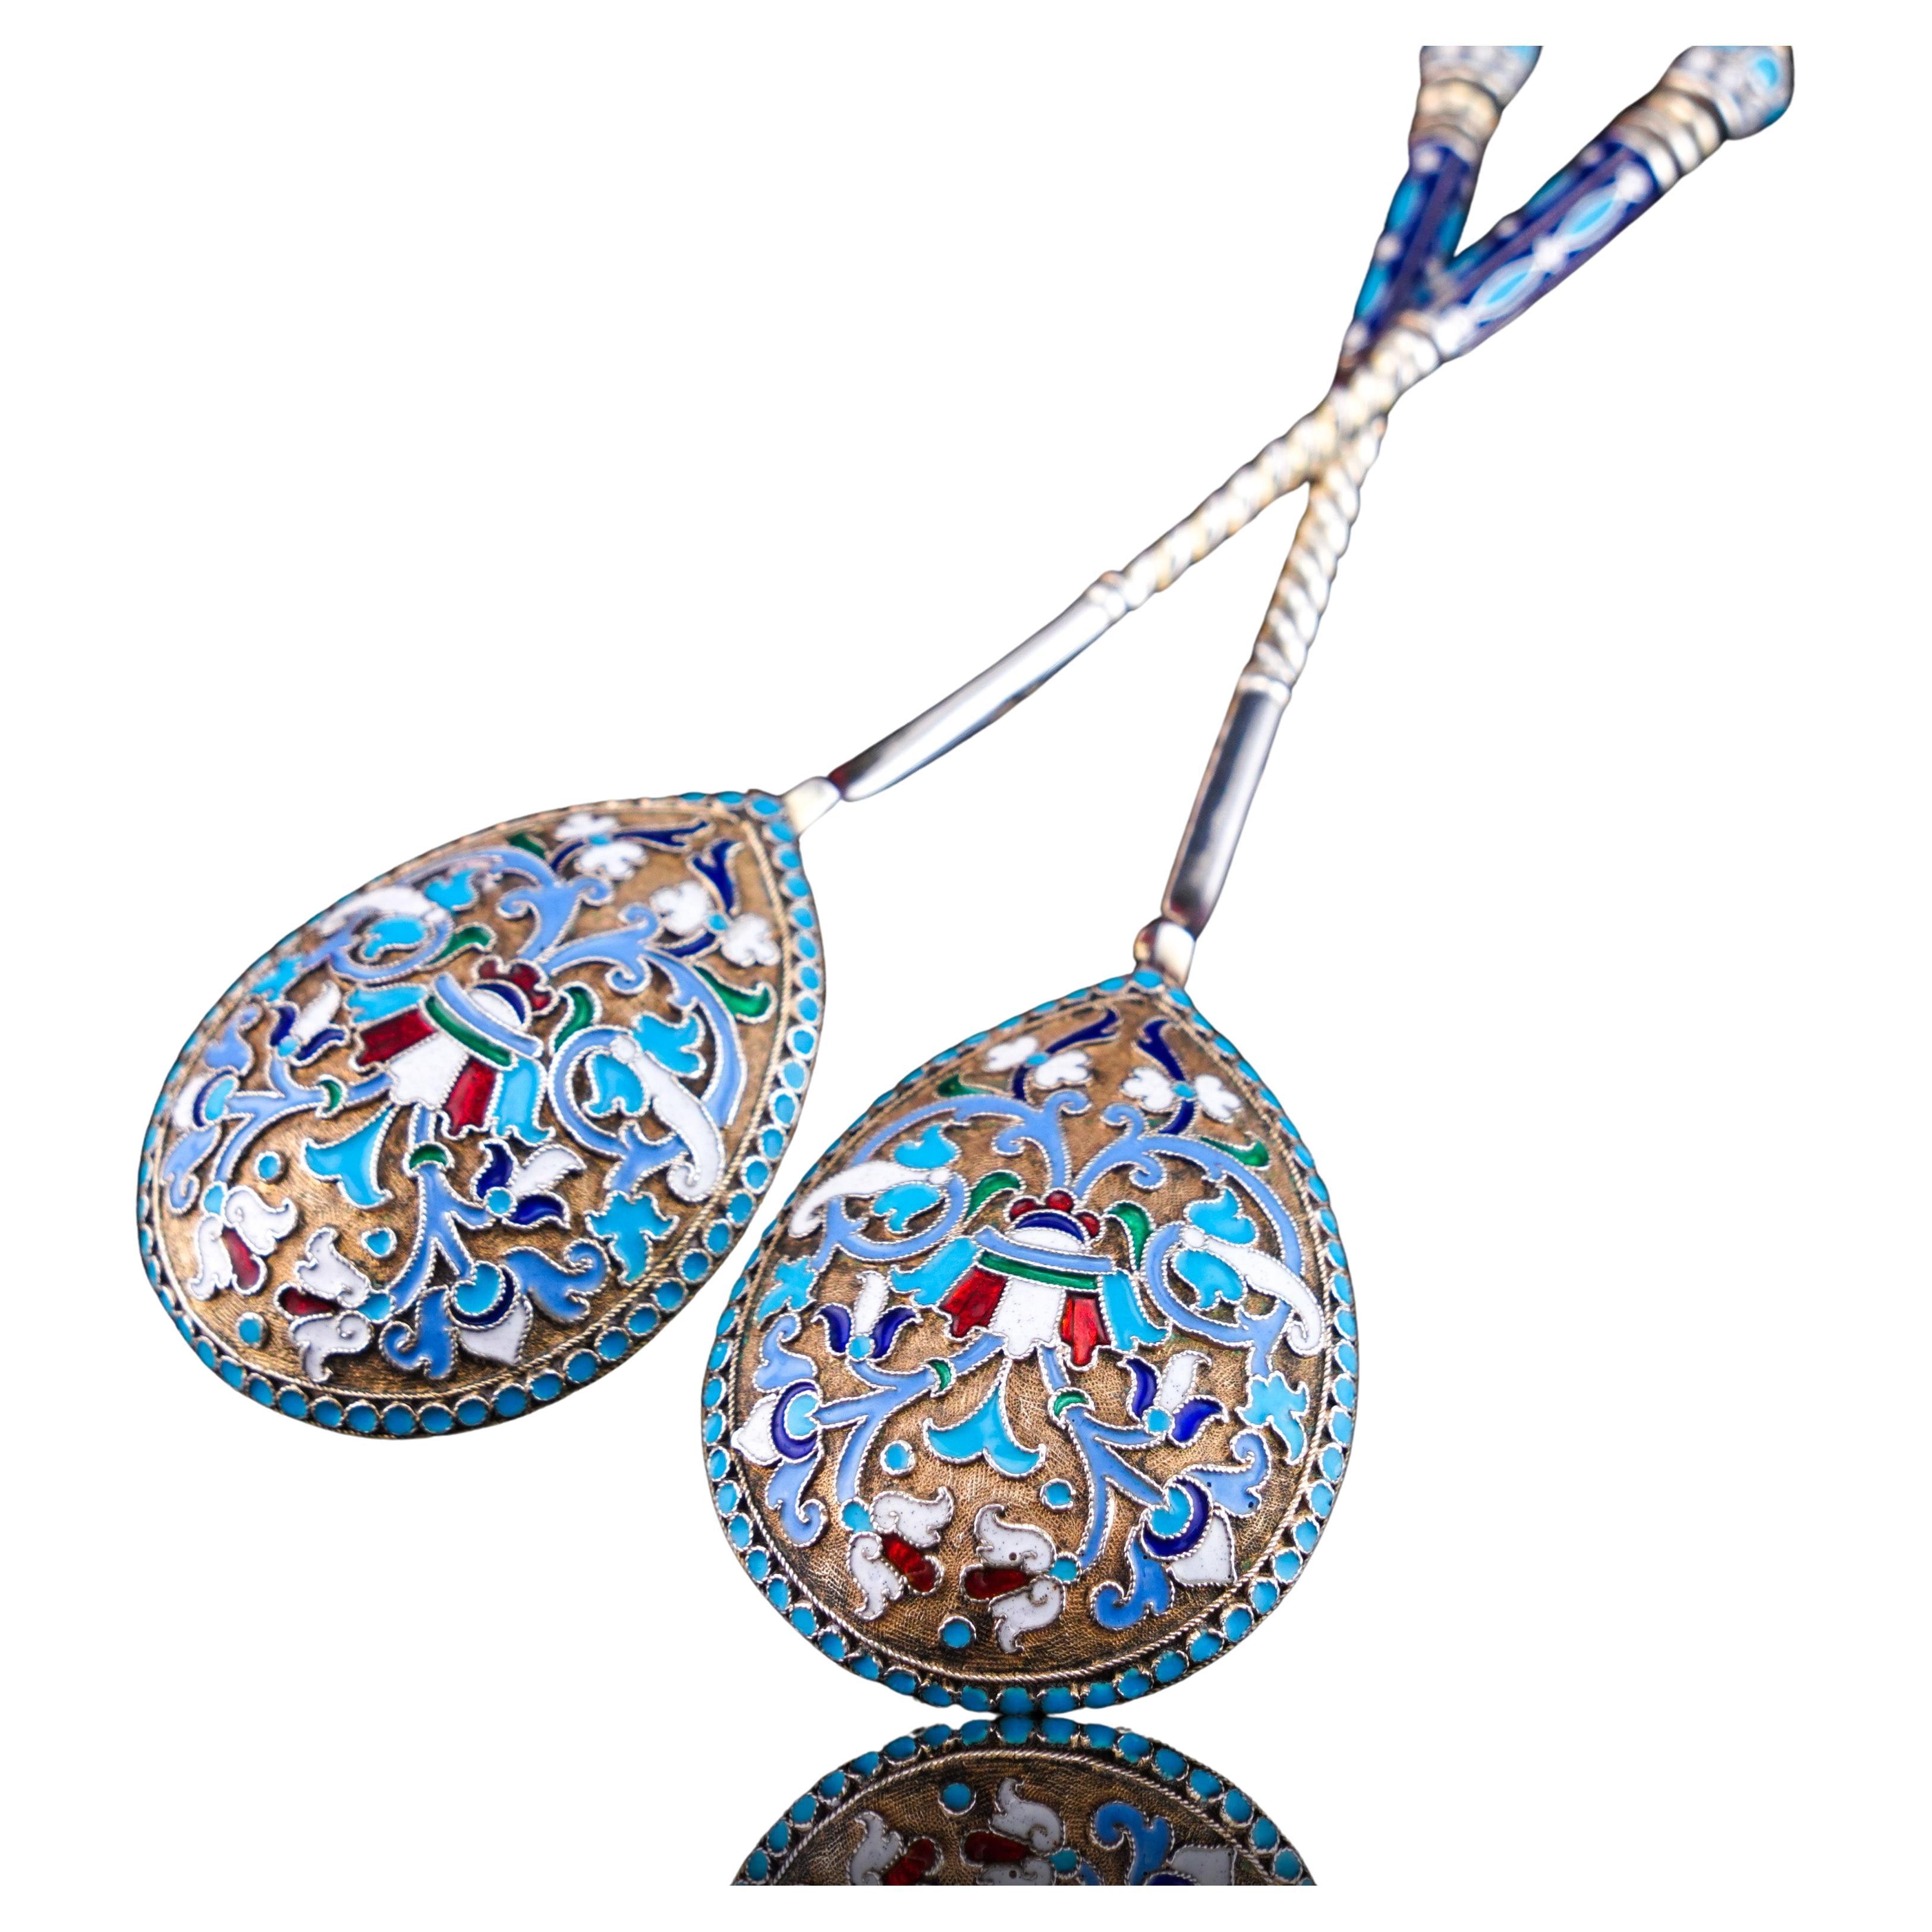 Antique Imperial Russian Solid Silver Spoons with Cloisonne Enamel c.1882 For Sale